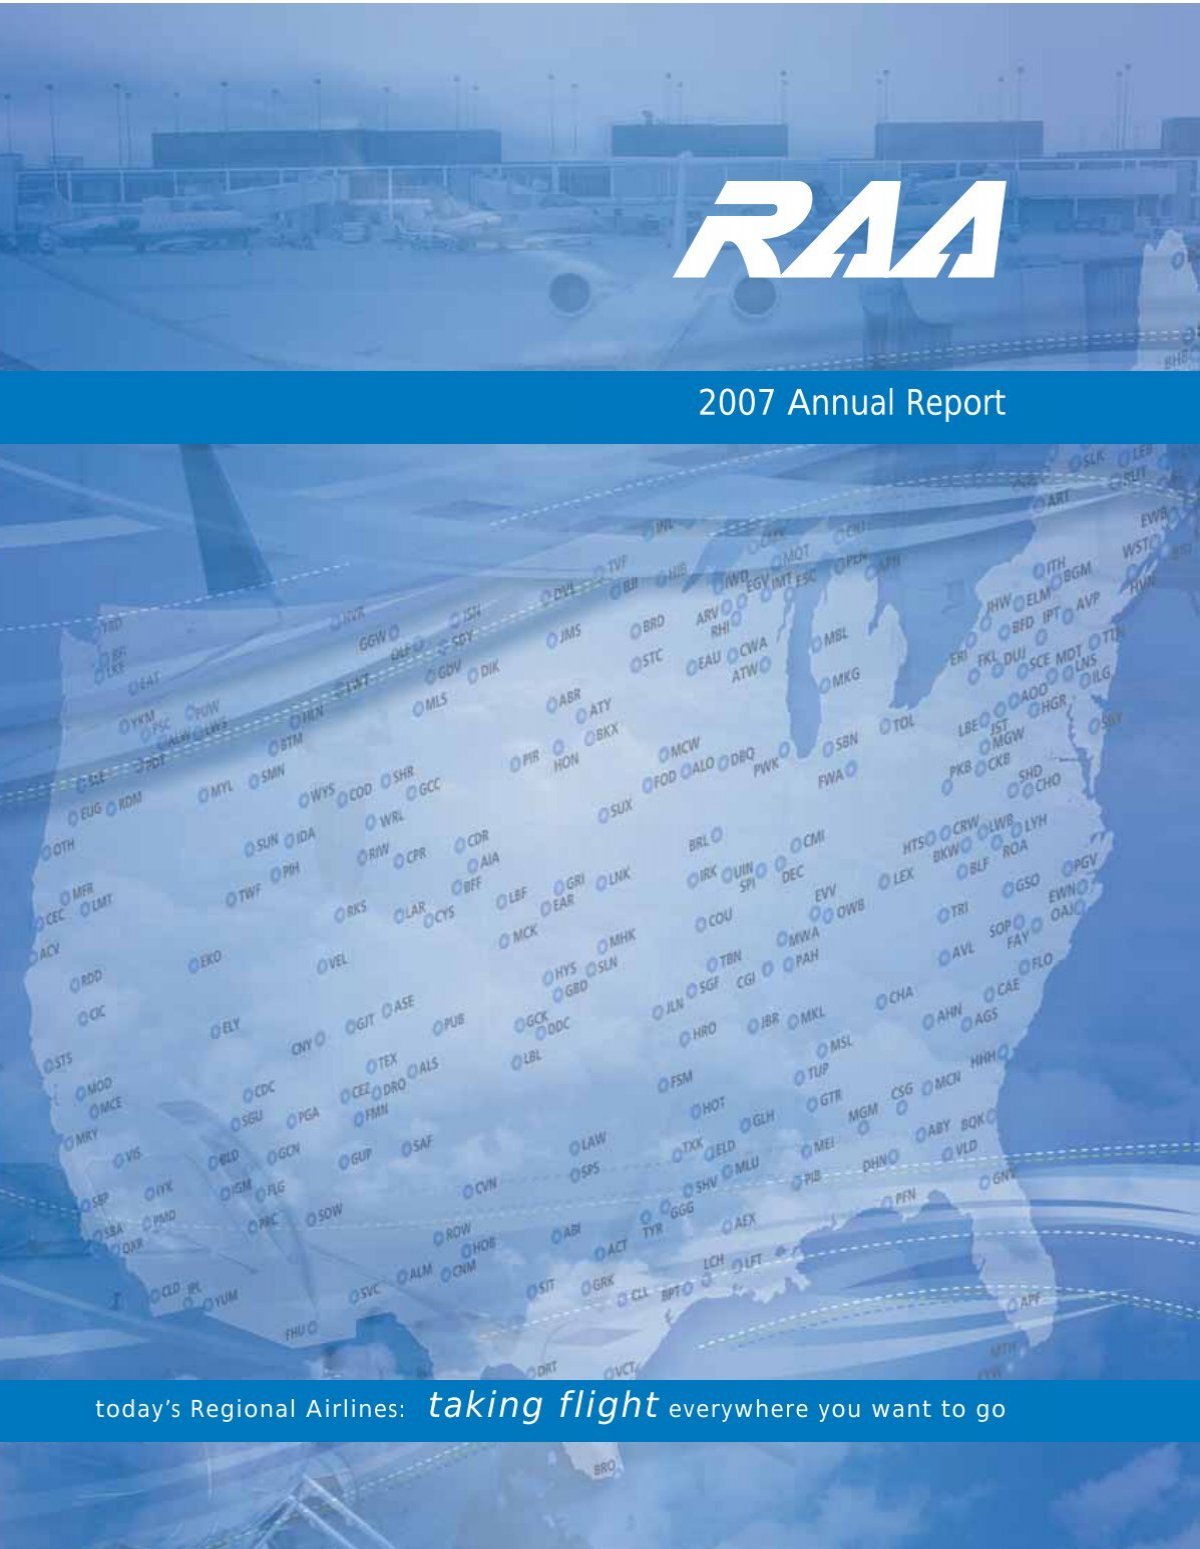 2007 Annual Report of the Regional Airline Association - RAA